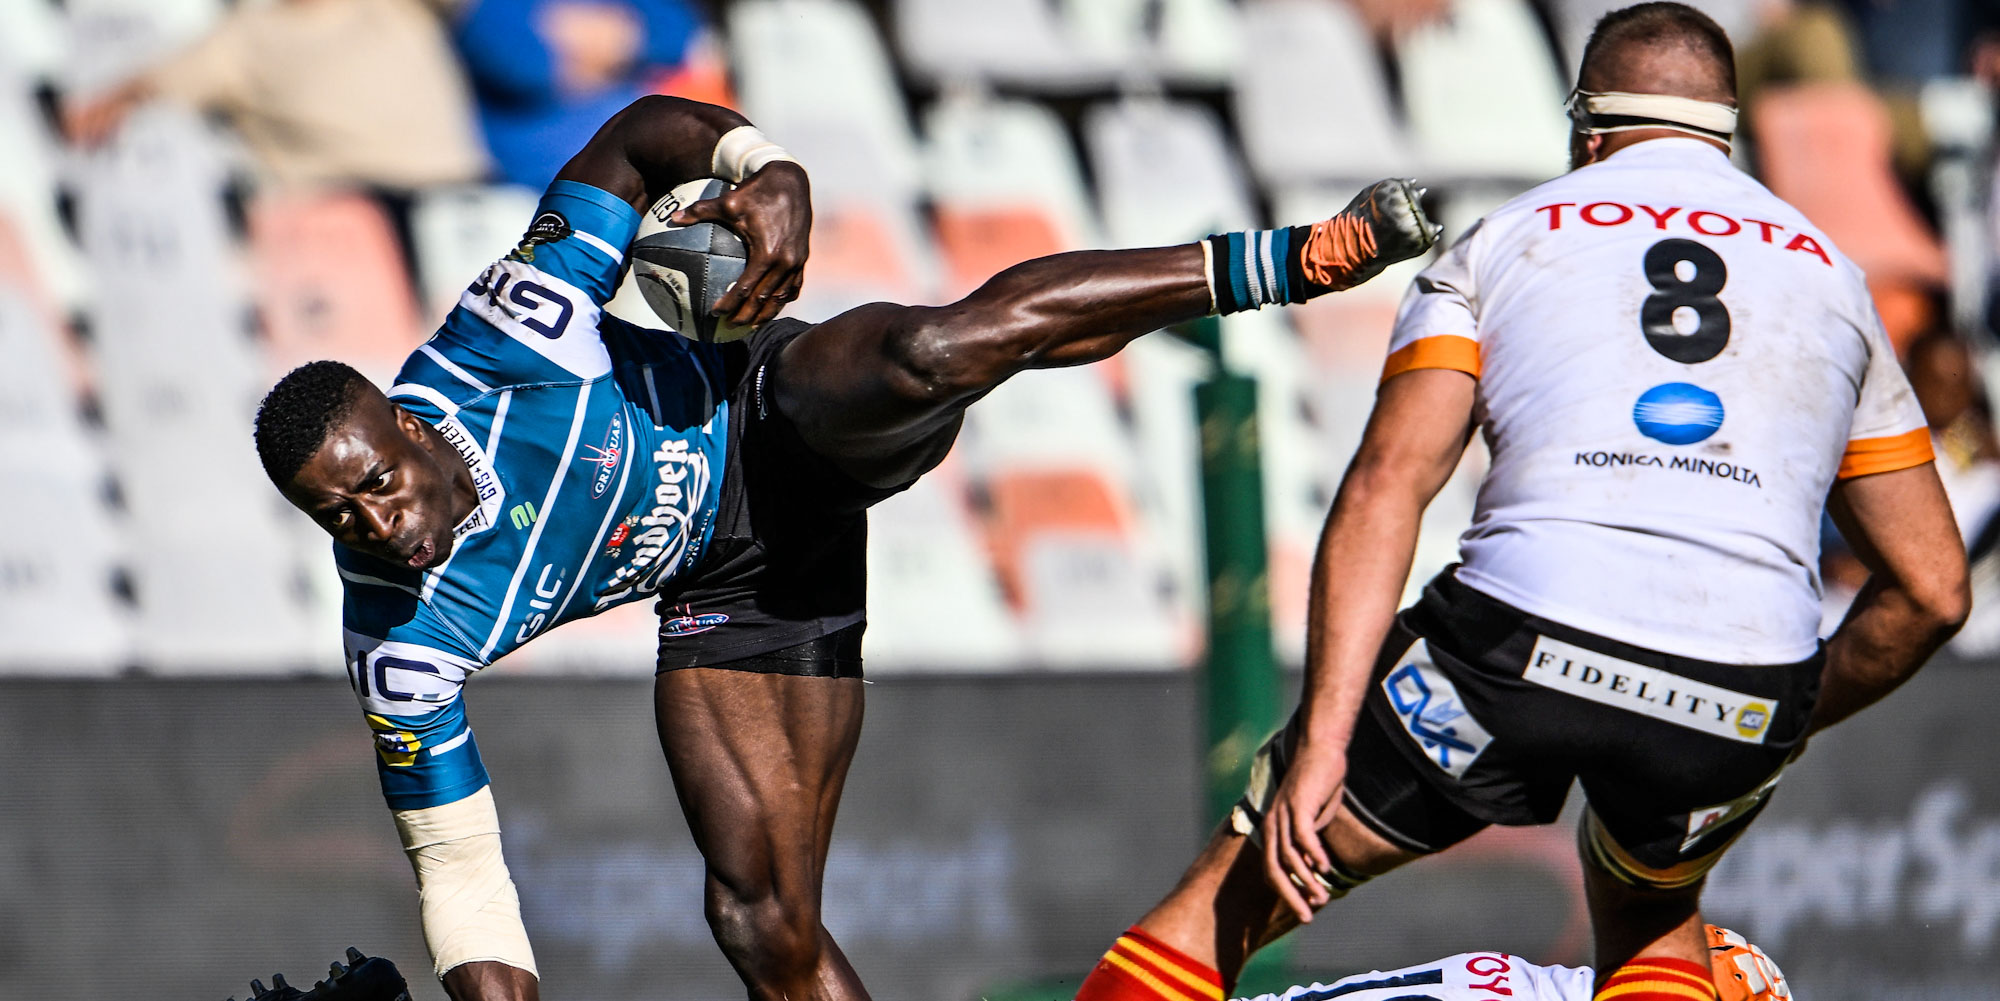 Luther Obi tries to keep his balance in the clash in Bloem.